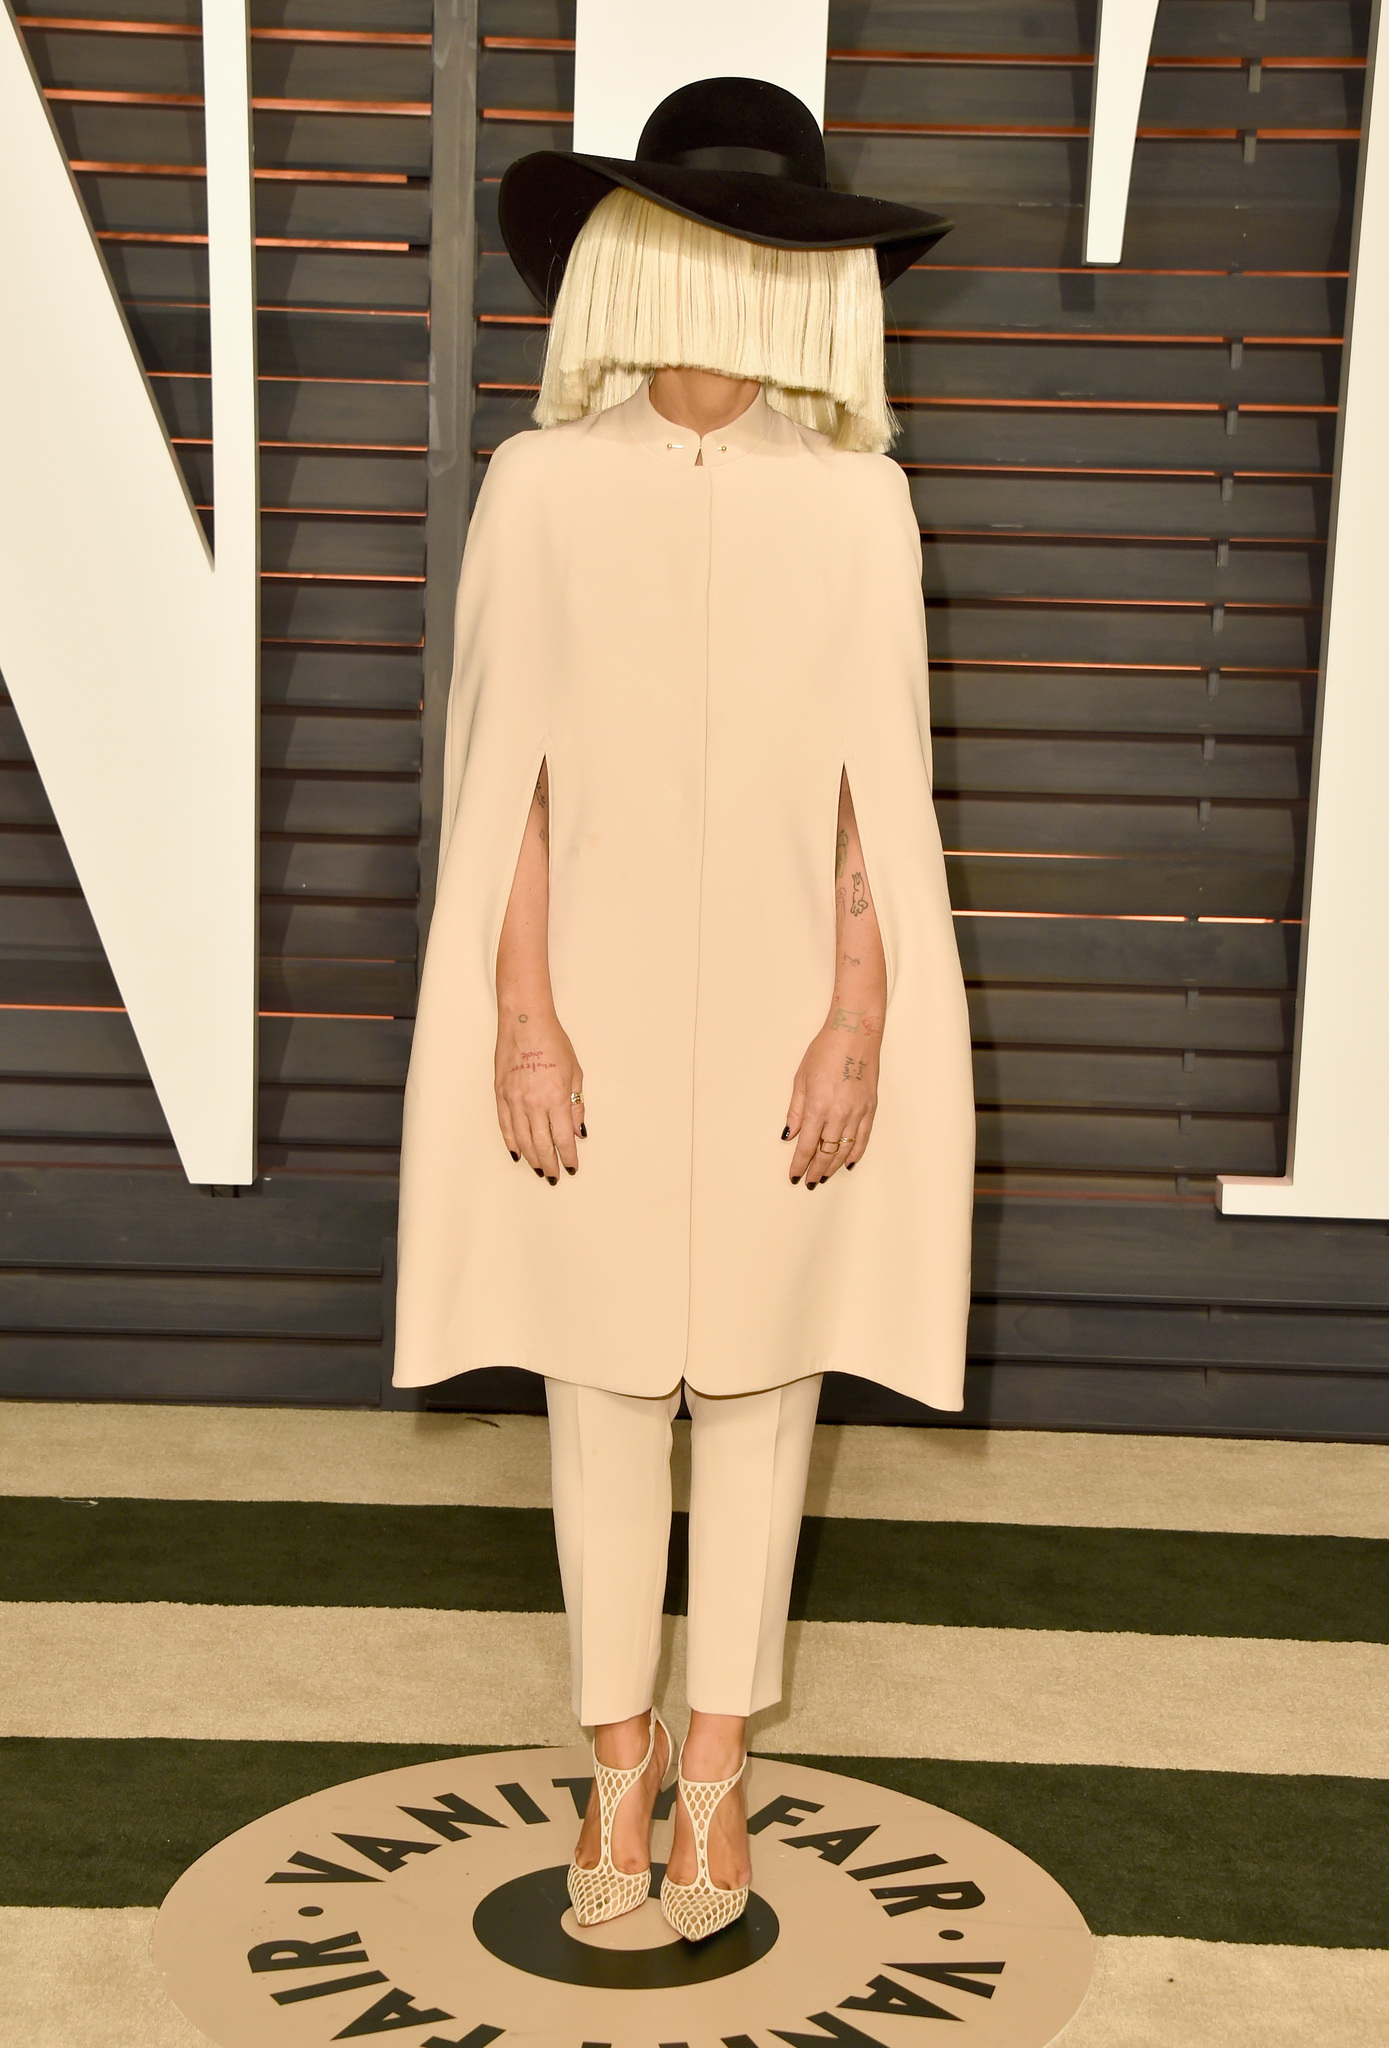 Sia at event of The Oscars (2015)